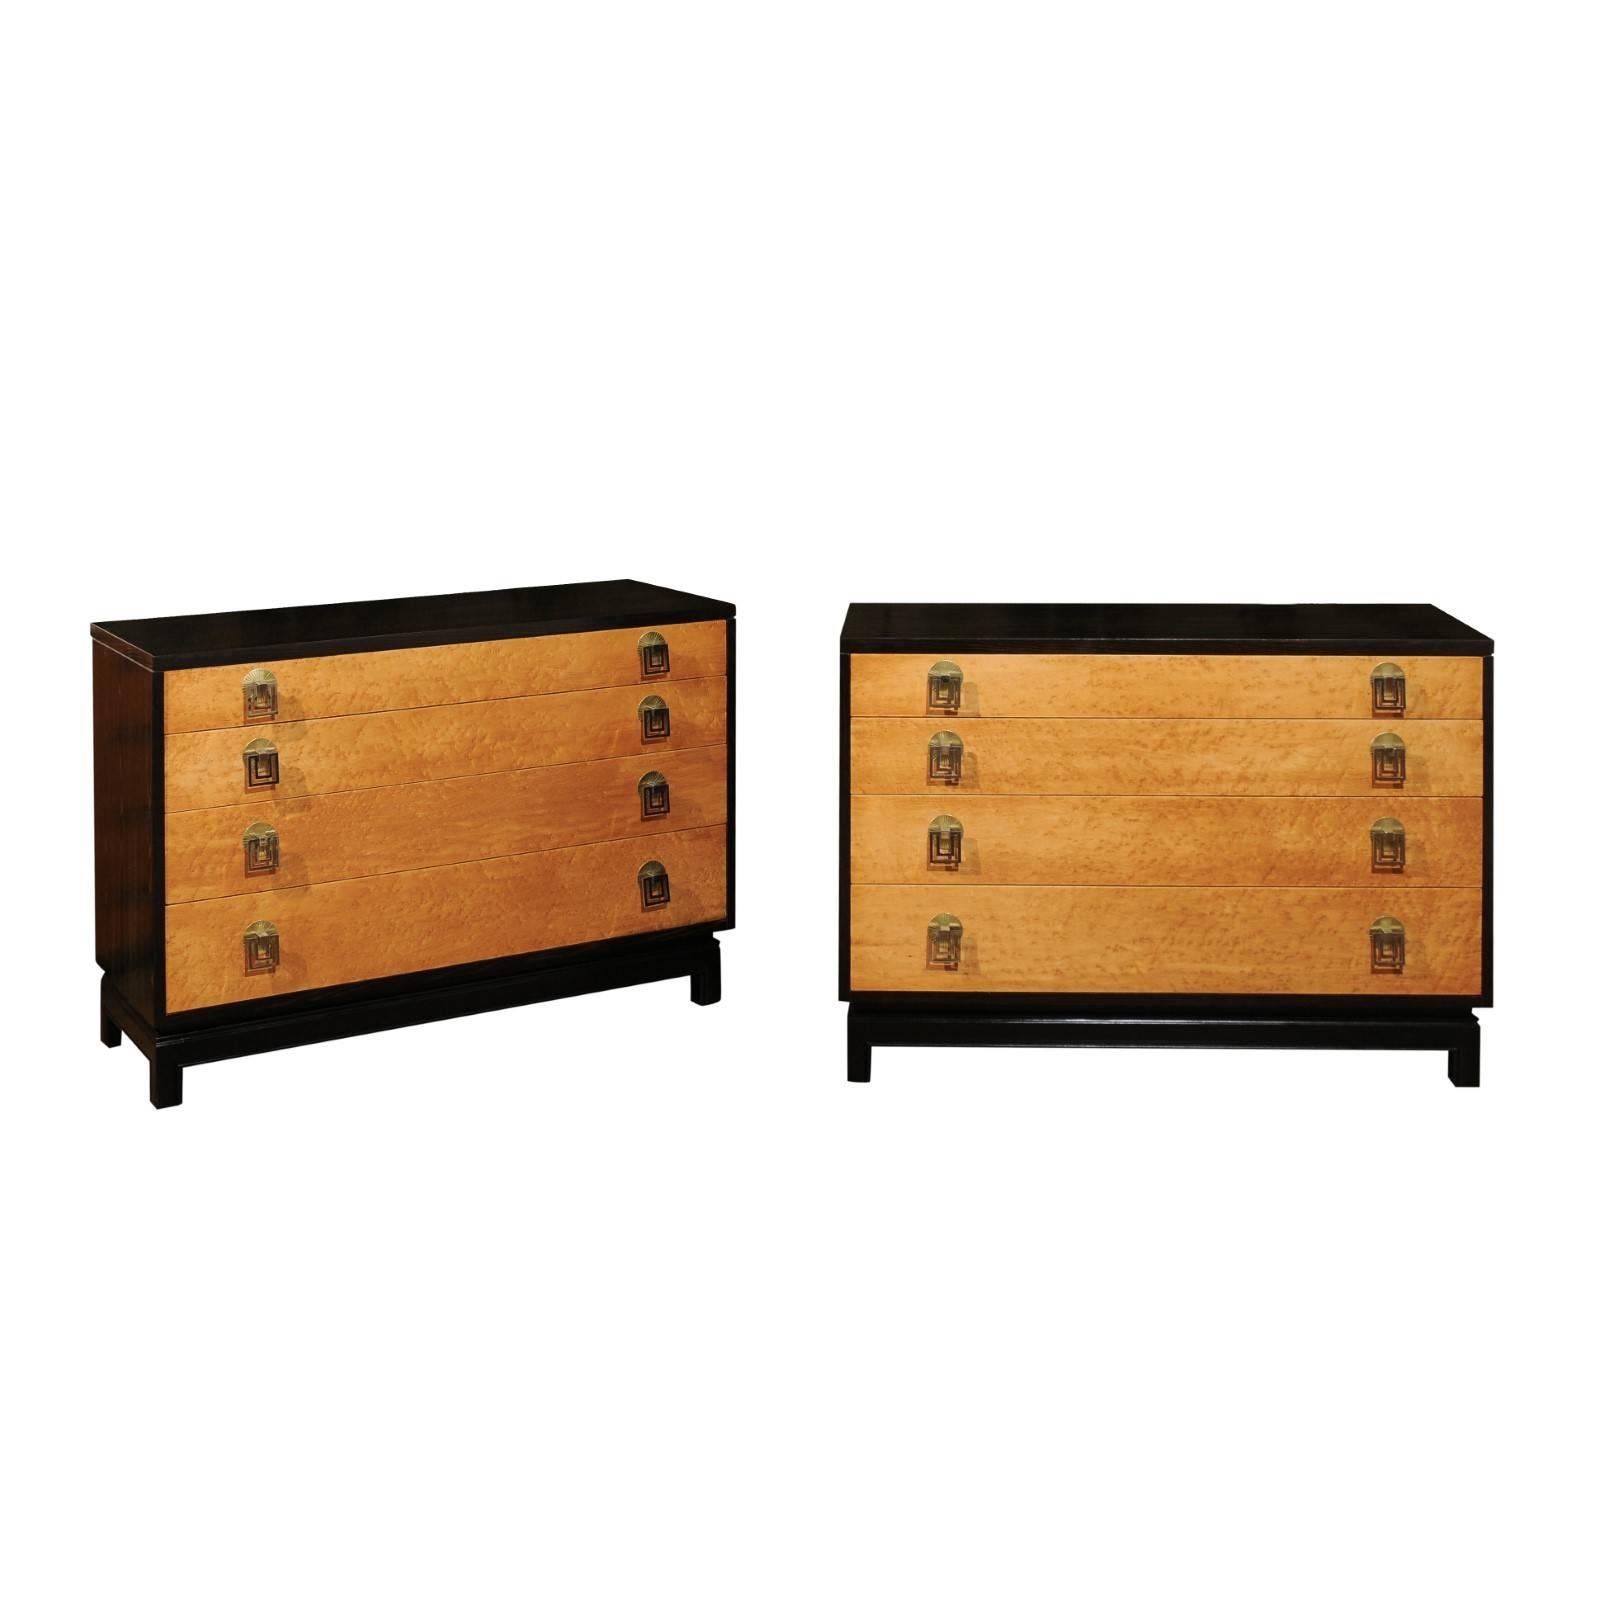 Breathtaking Pair of Chests by Renzo Rutili in Cerused Oak and Bird's-Eye Maple